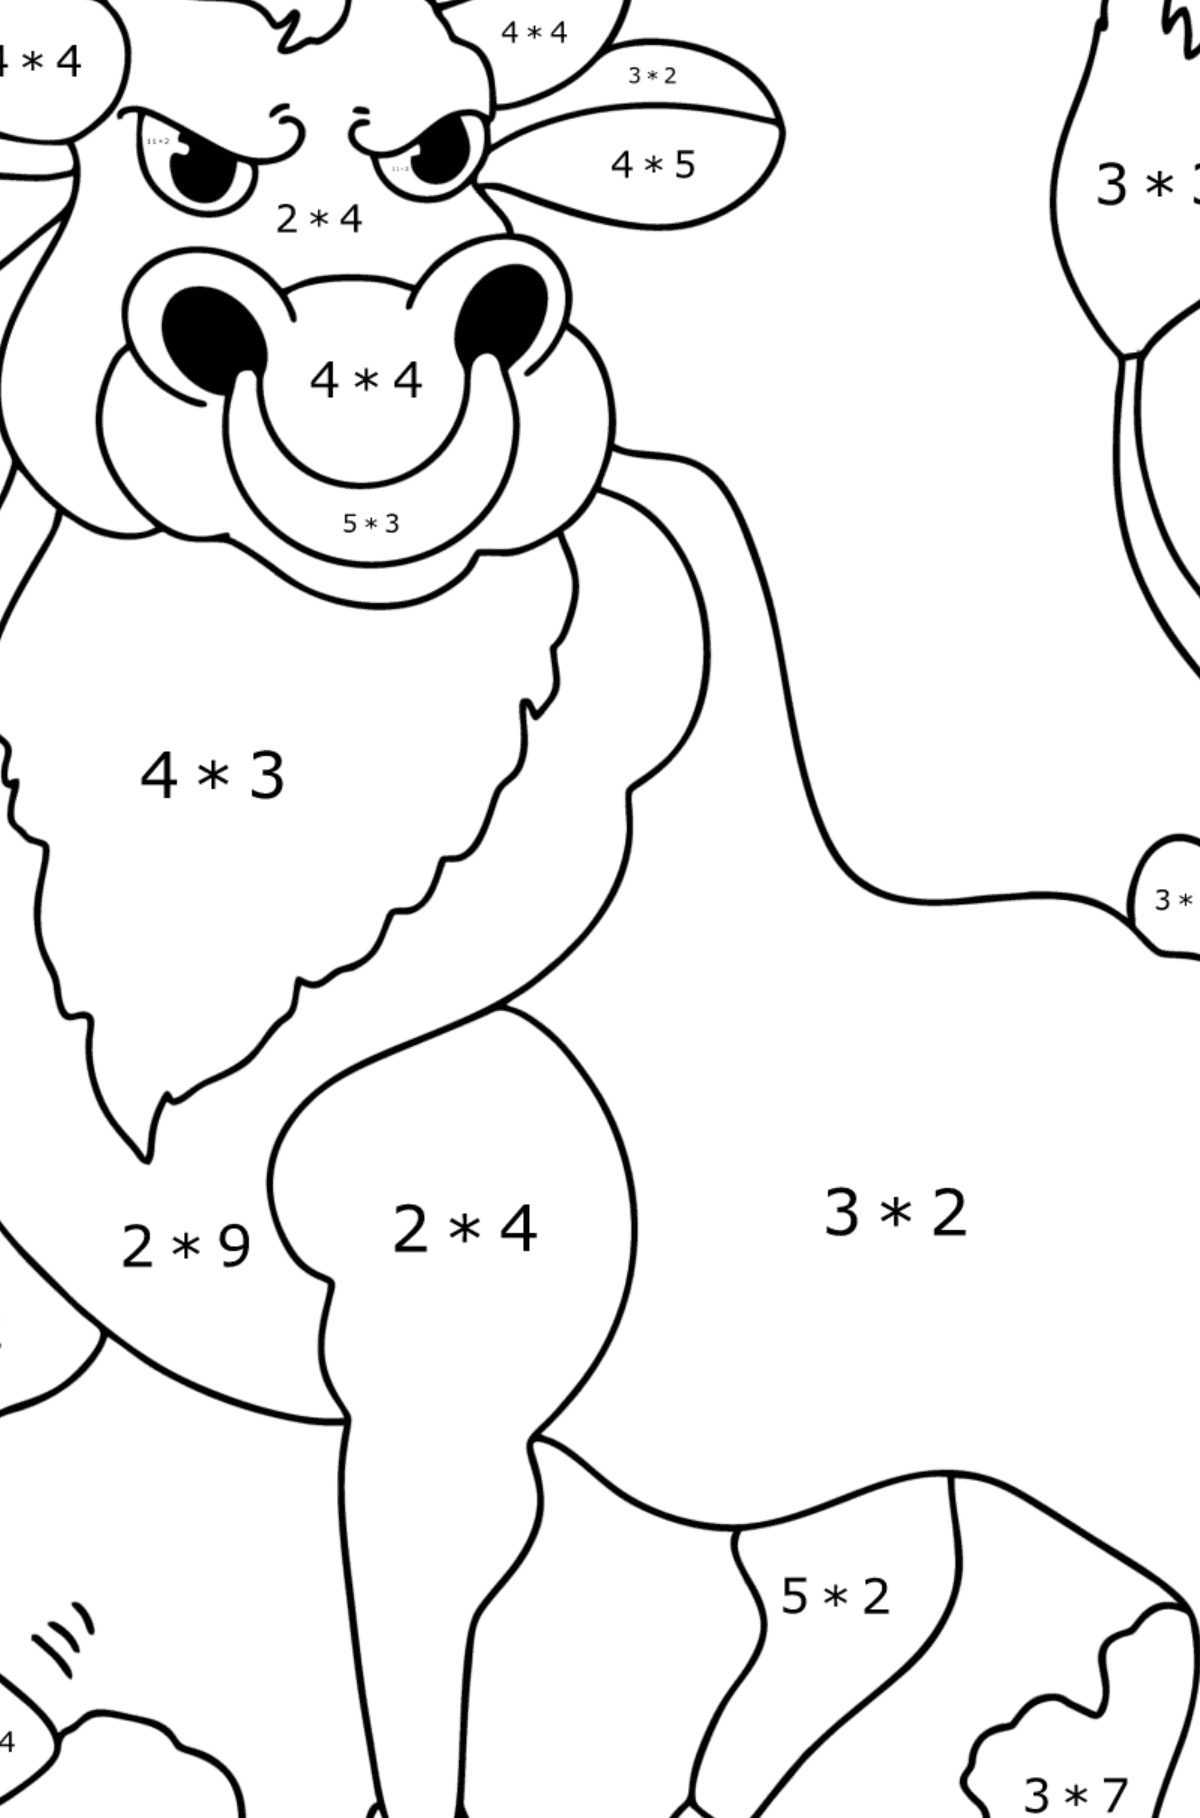 Brave bull Coloring page - Math Coloring - Multiplication for Kids